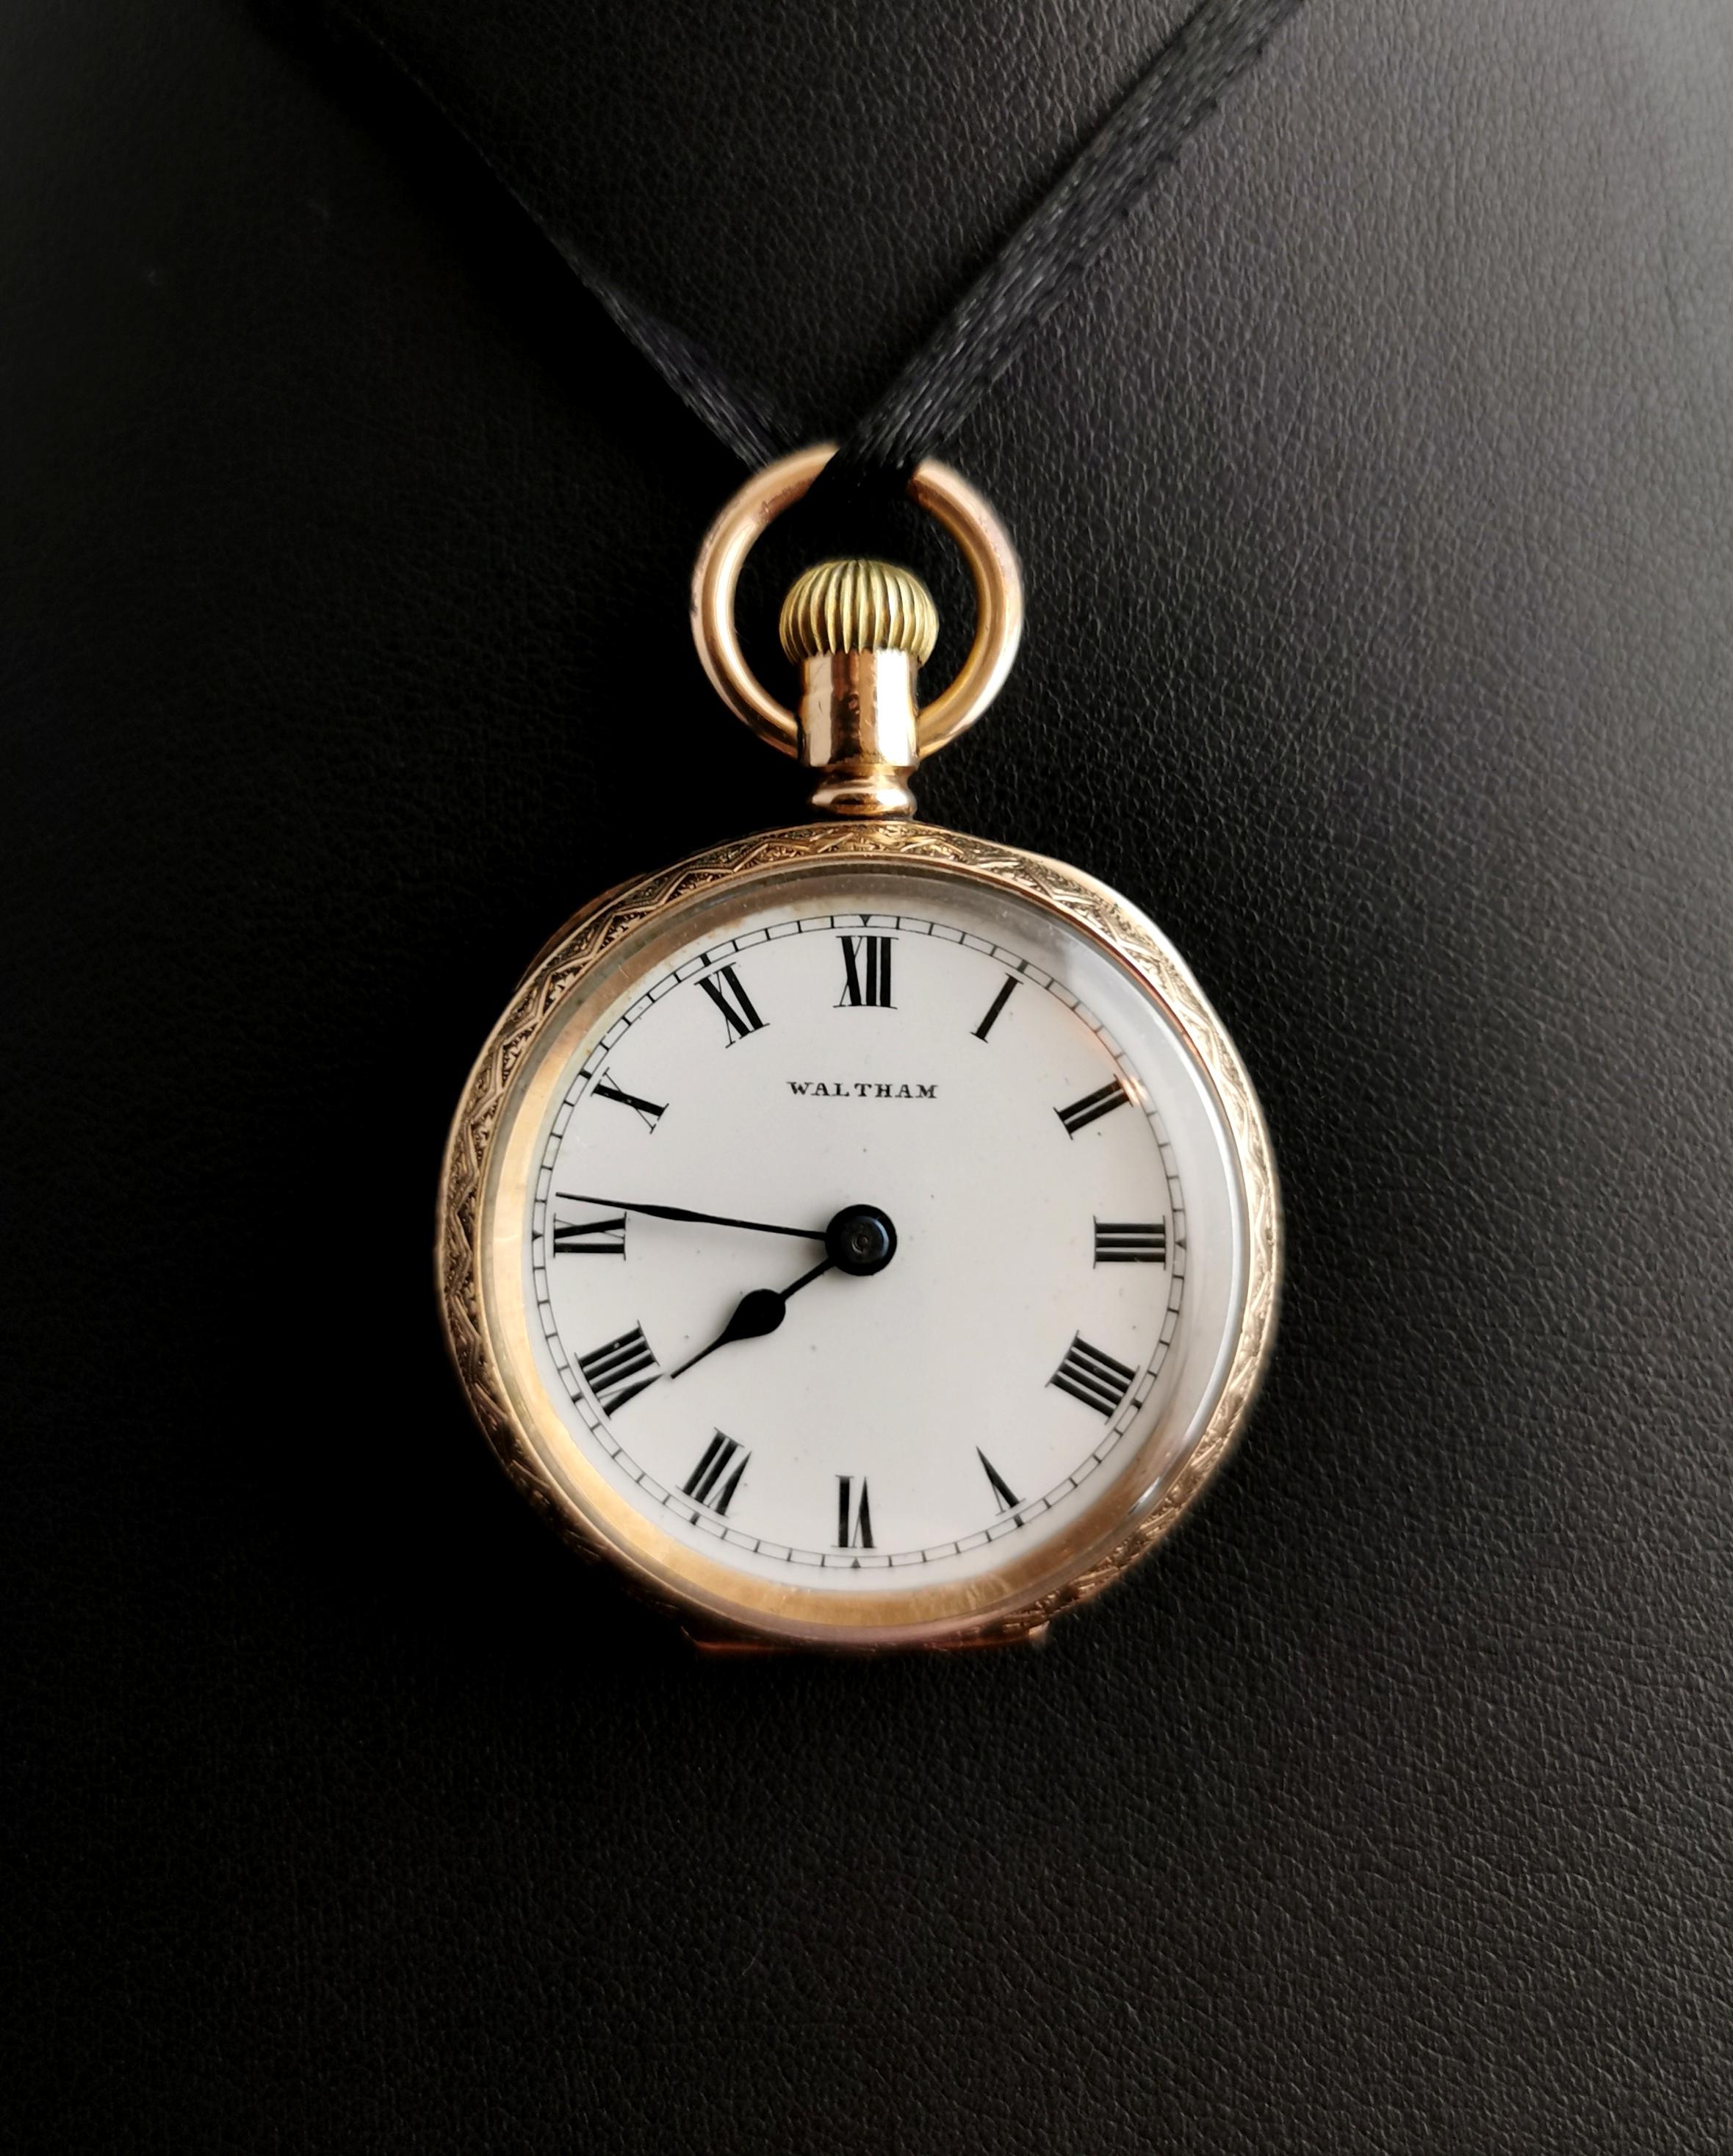 An attractive antique, Edwardian era gold plated fob watch or pocket watch.

It is a smaller size usually created for a lady, it has an American Waltham movement with a serial number dating it to the mid 1900s.

It is cased in an attractive yellow